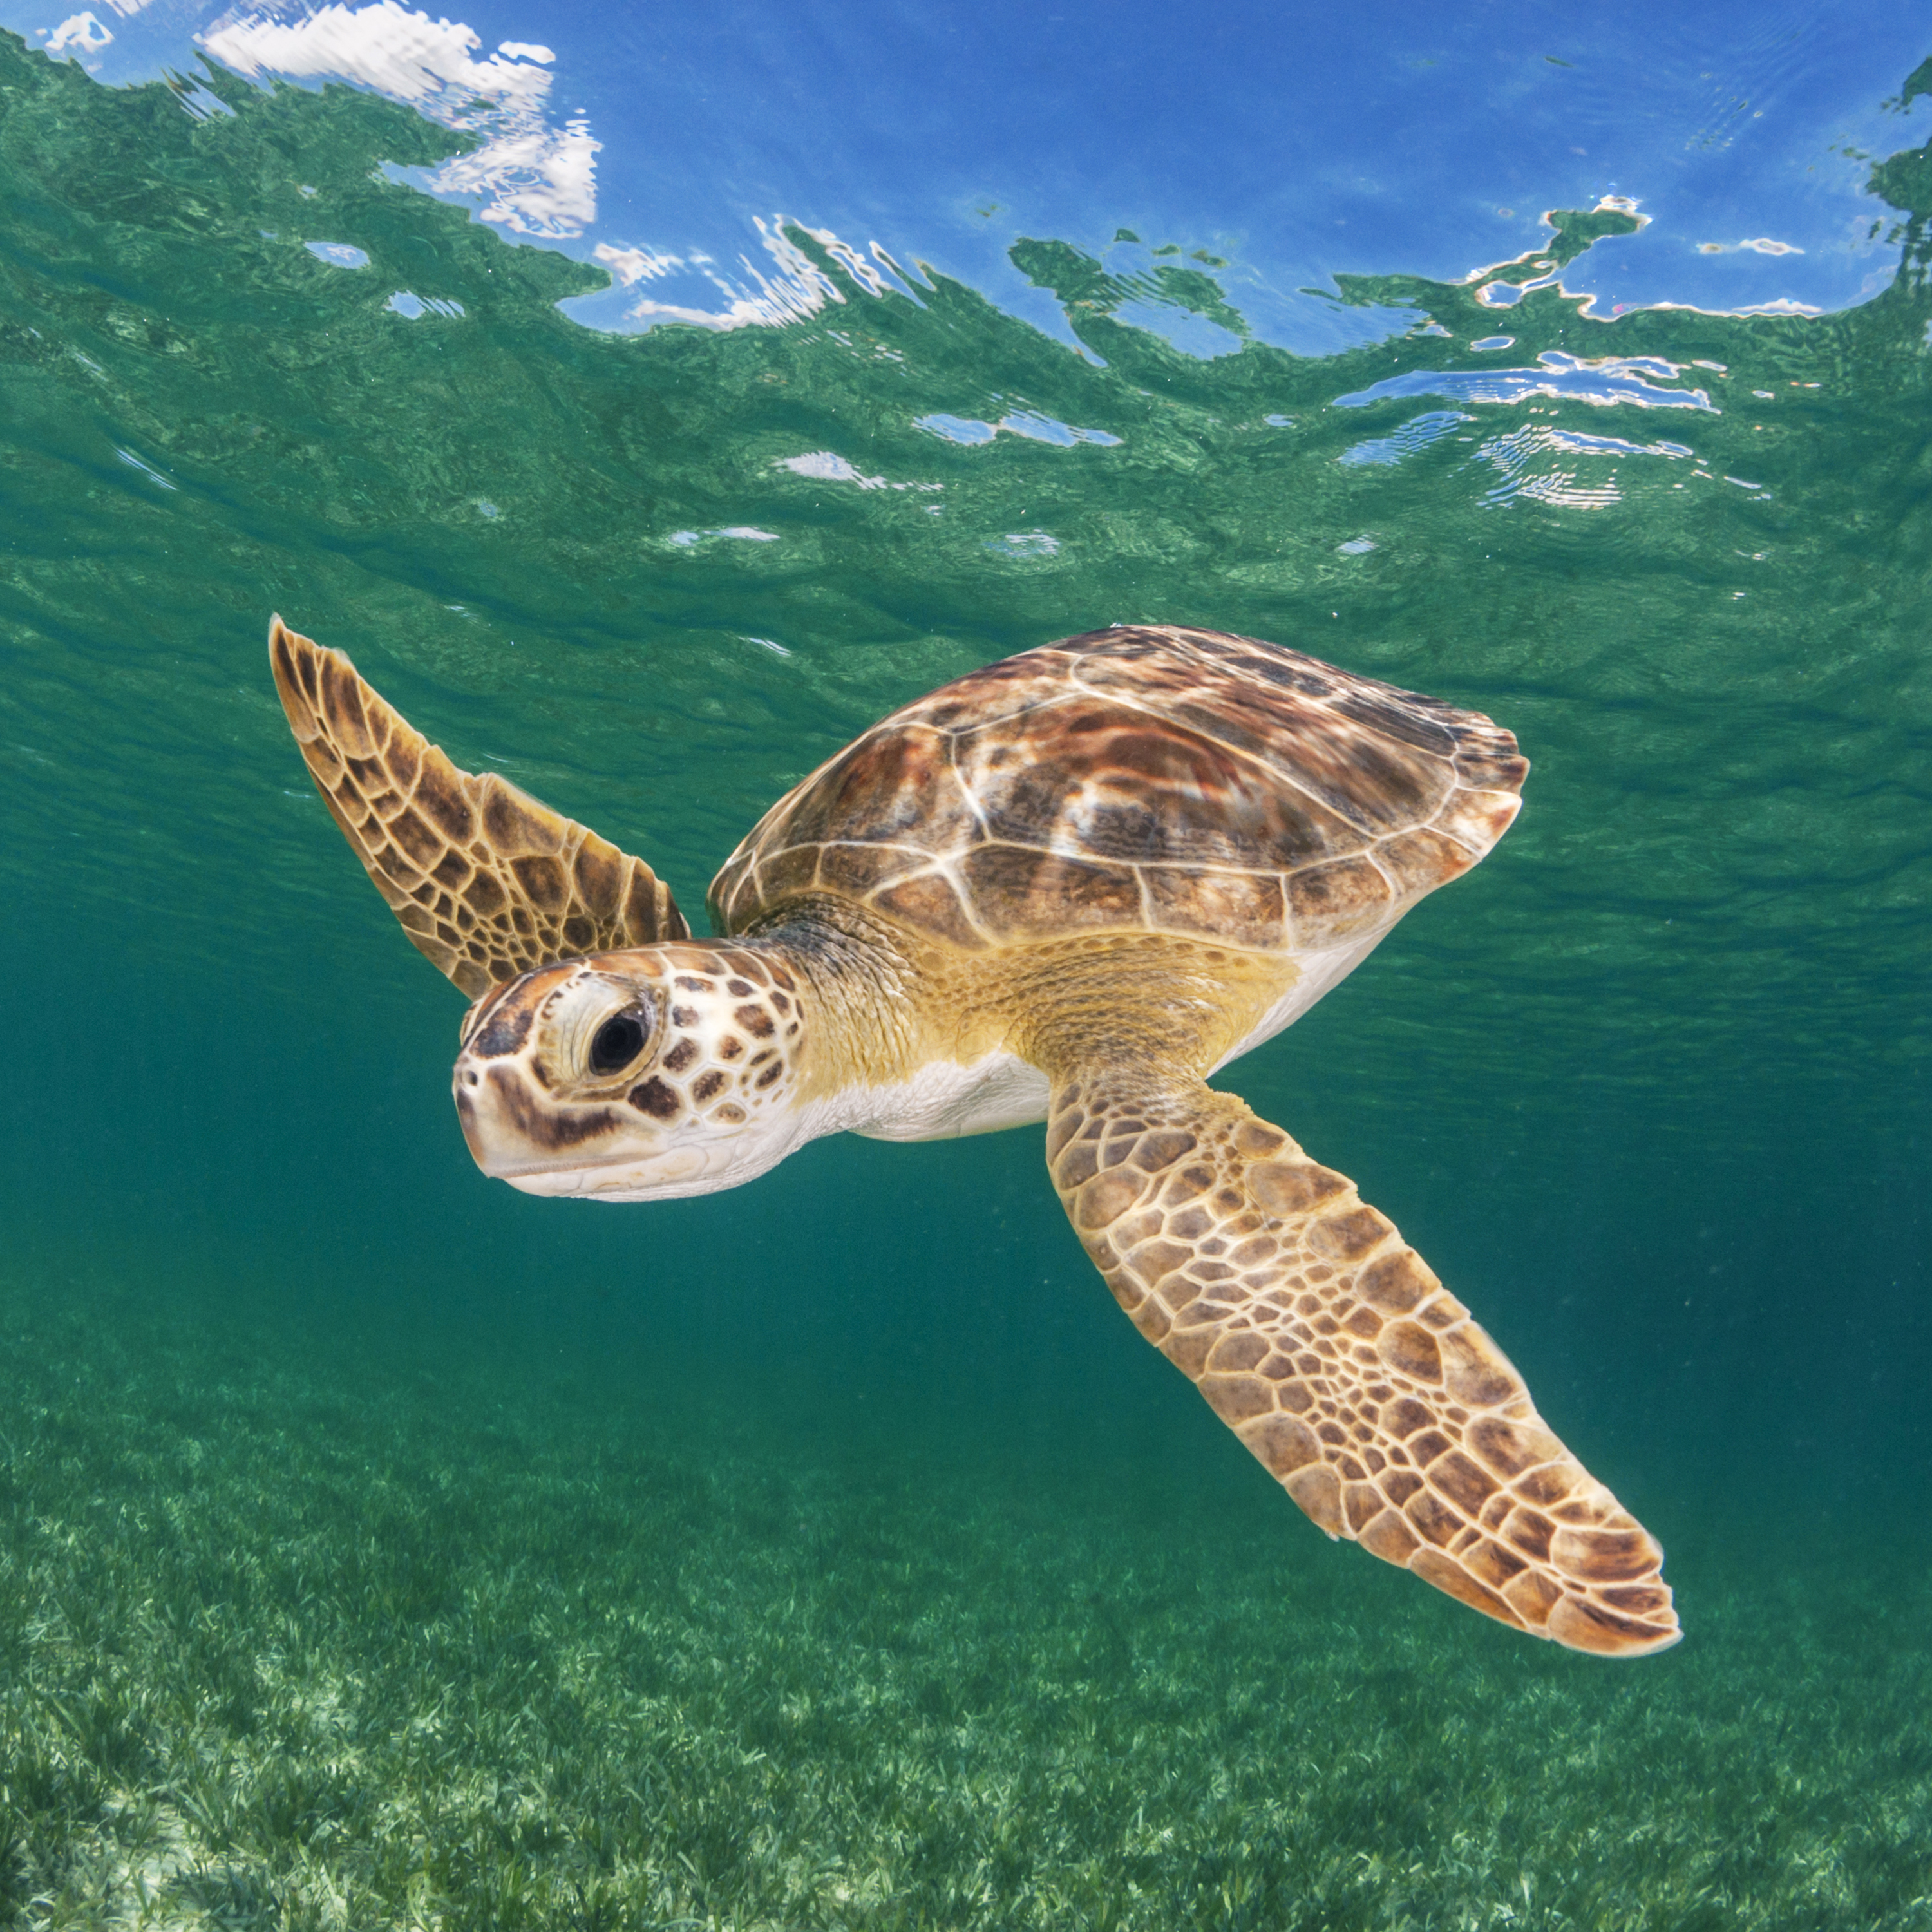 Earthwatch student groups have a variety of expedition options including studying sea turtles in the Bahamas